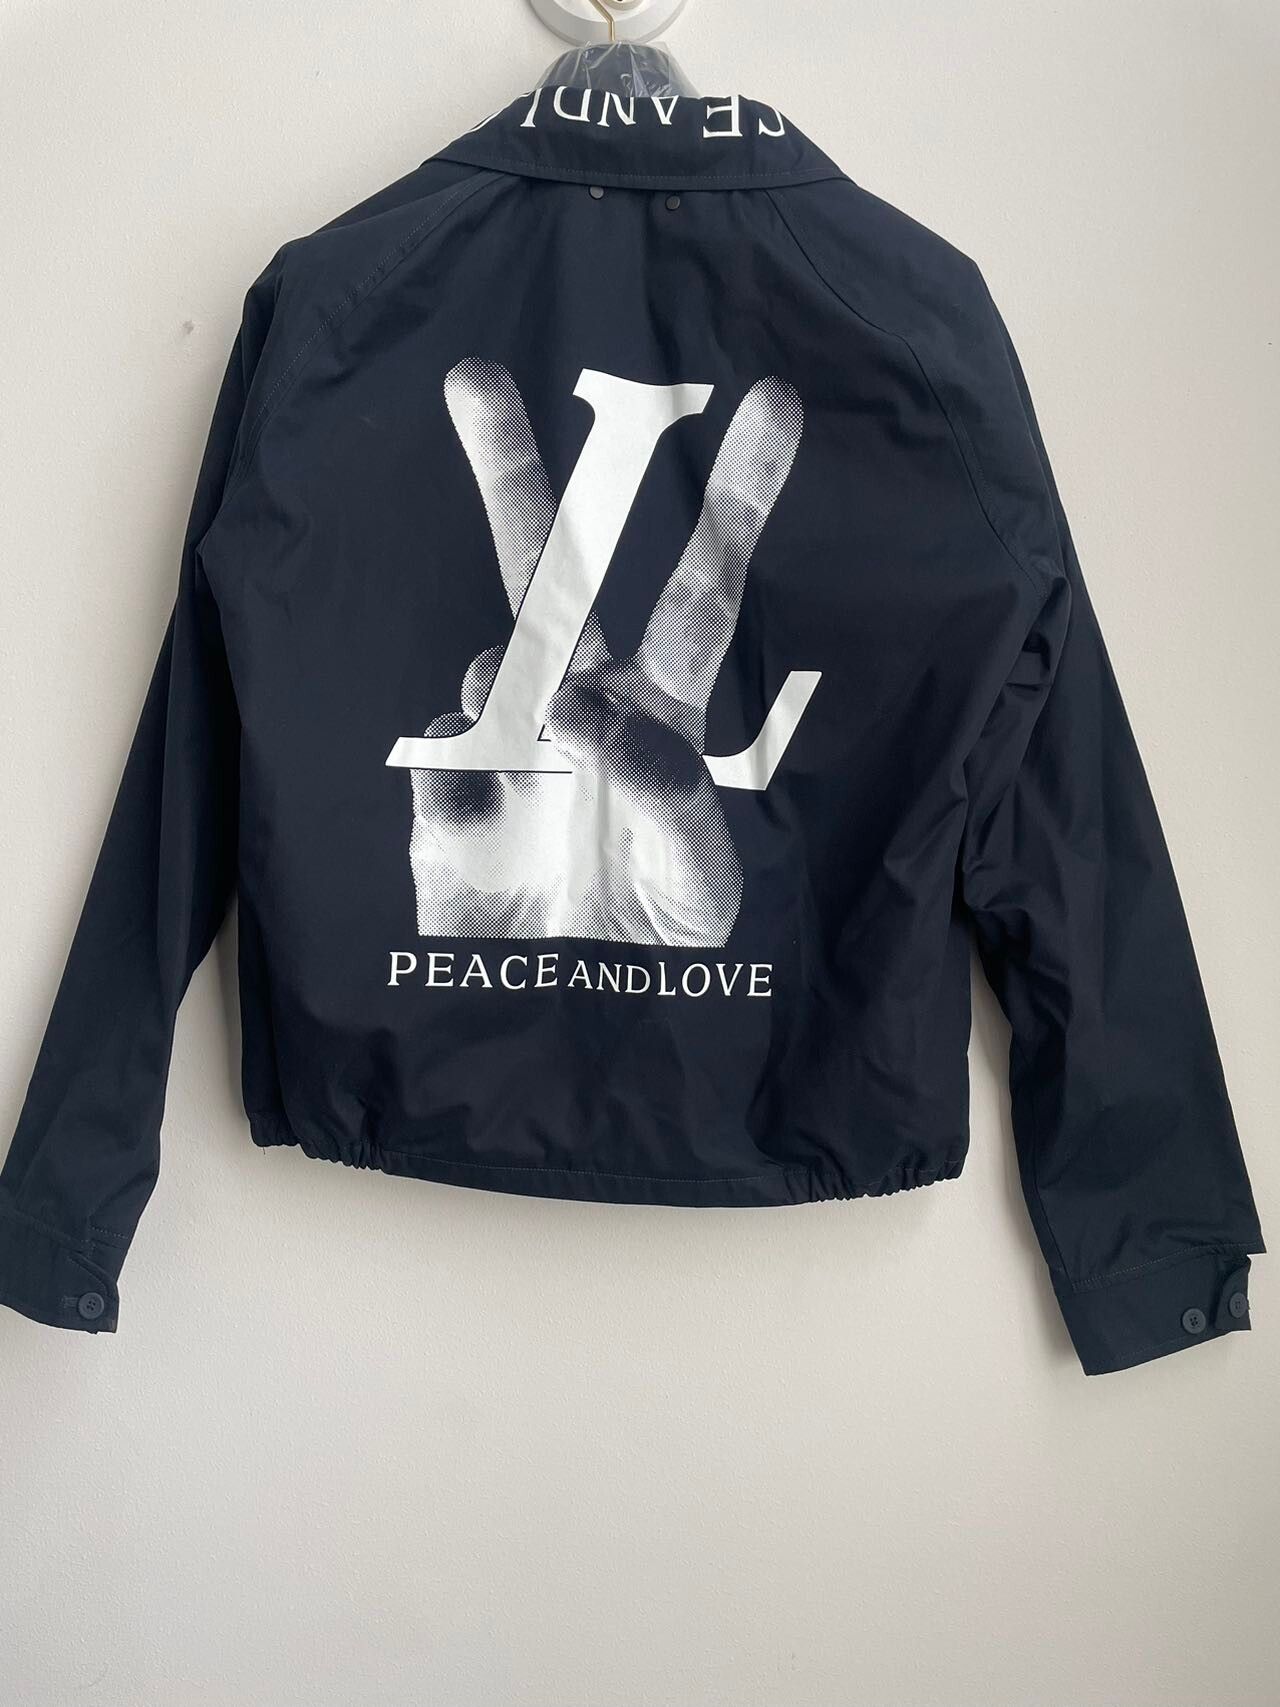 Louis Vuitton Peace And Love Jacket | Grailed